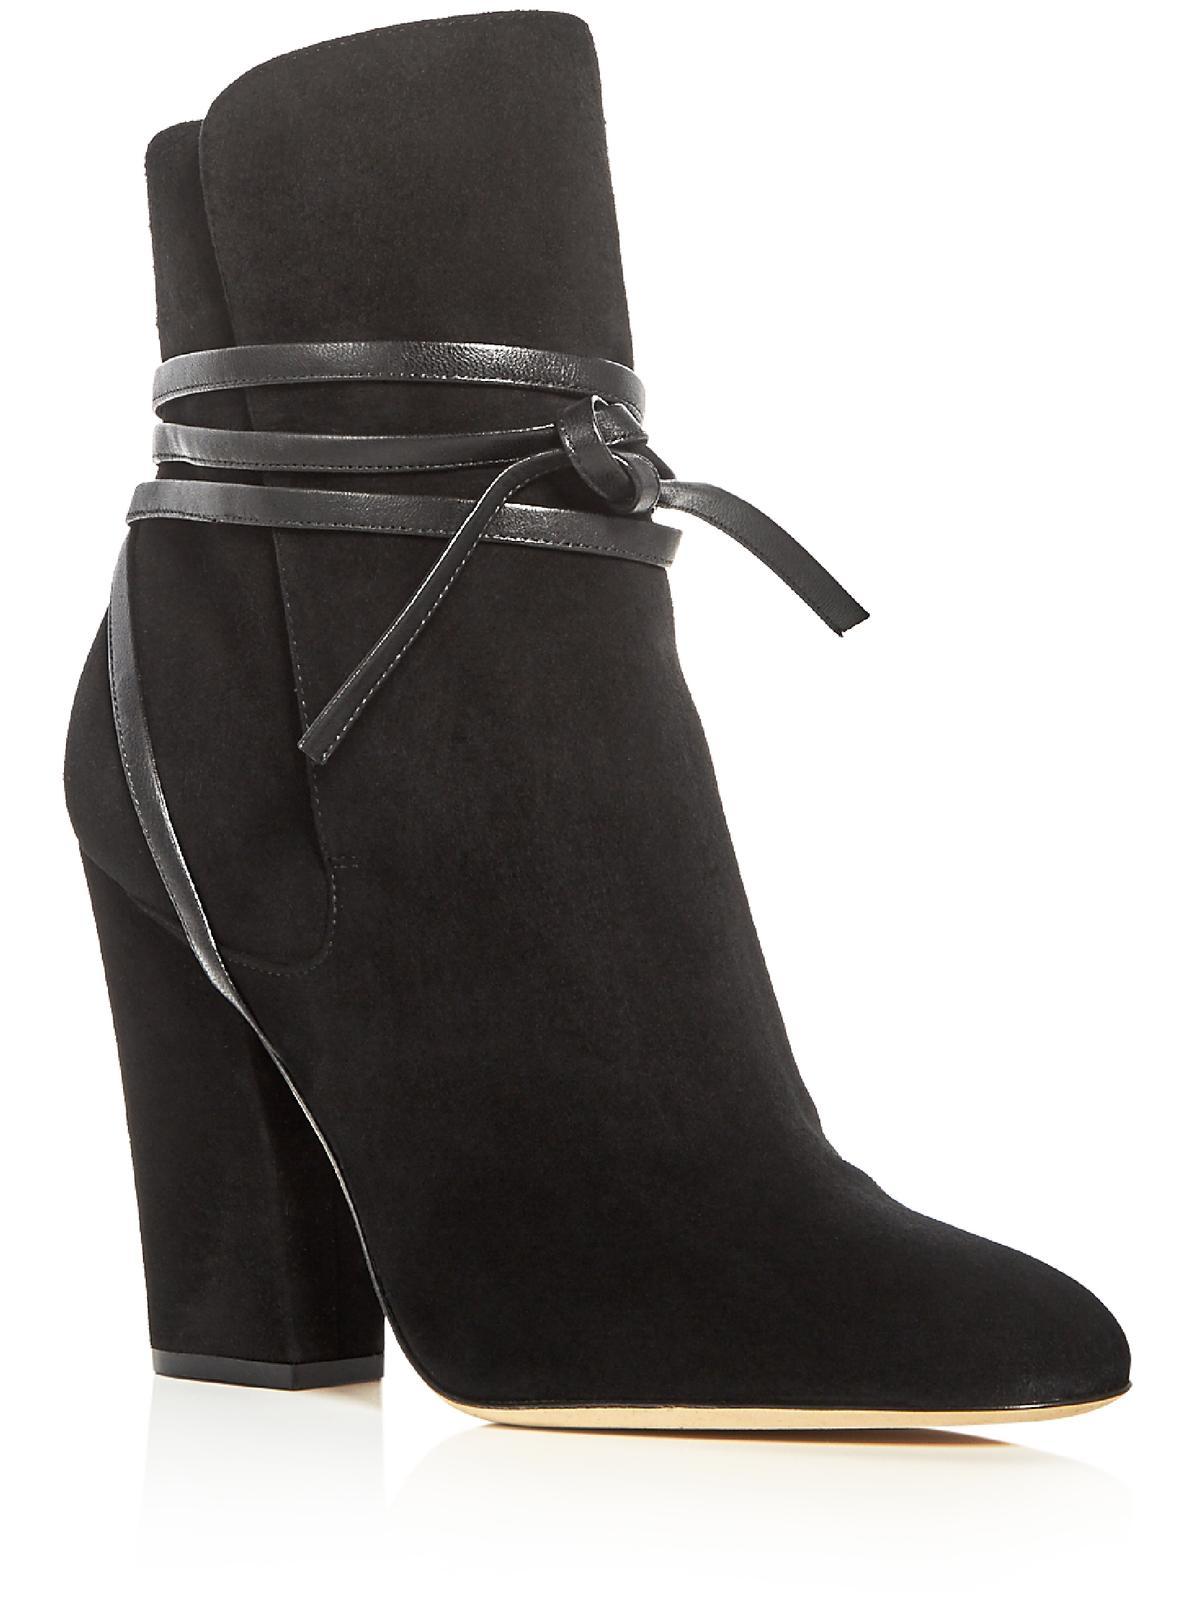 Sergio Rossi Scarpe Donna Suede Pull-on Ankle Boots in Black | Lyst